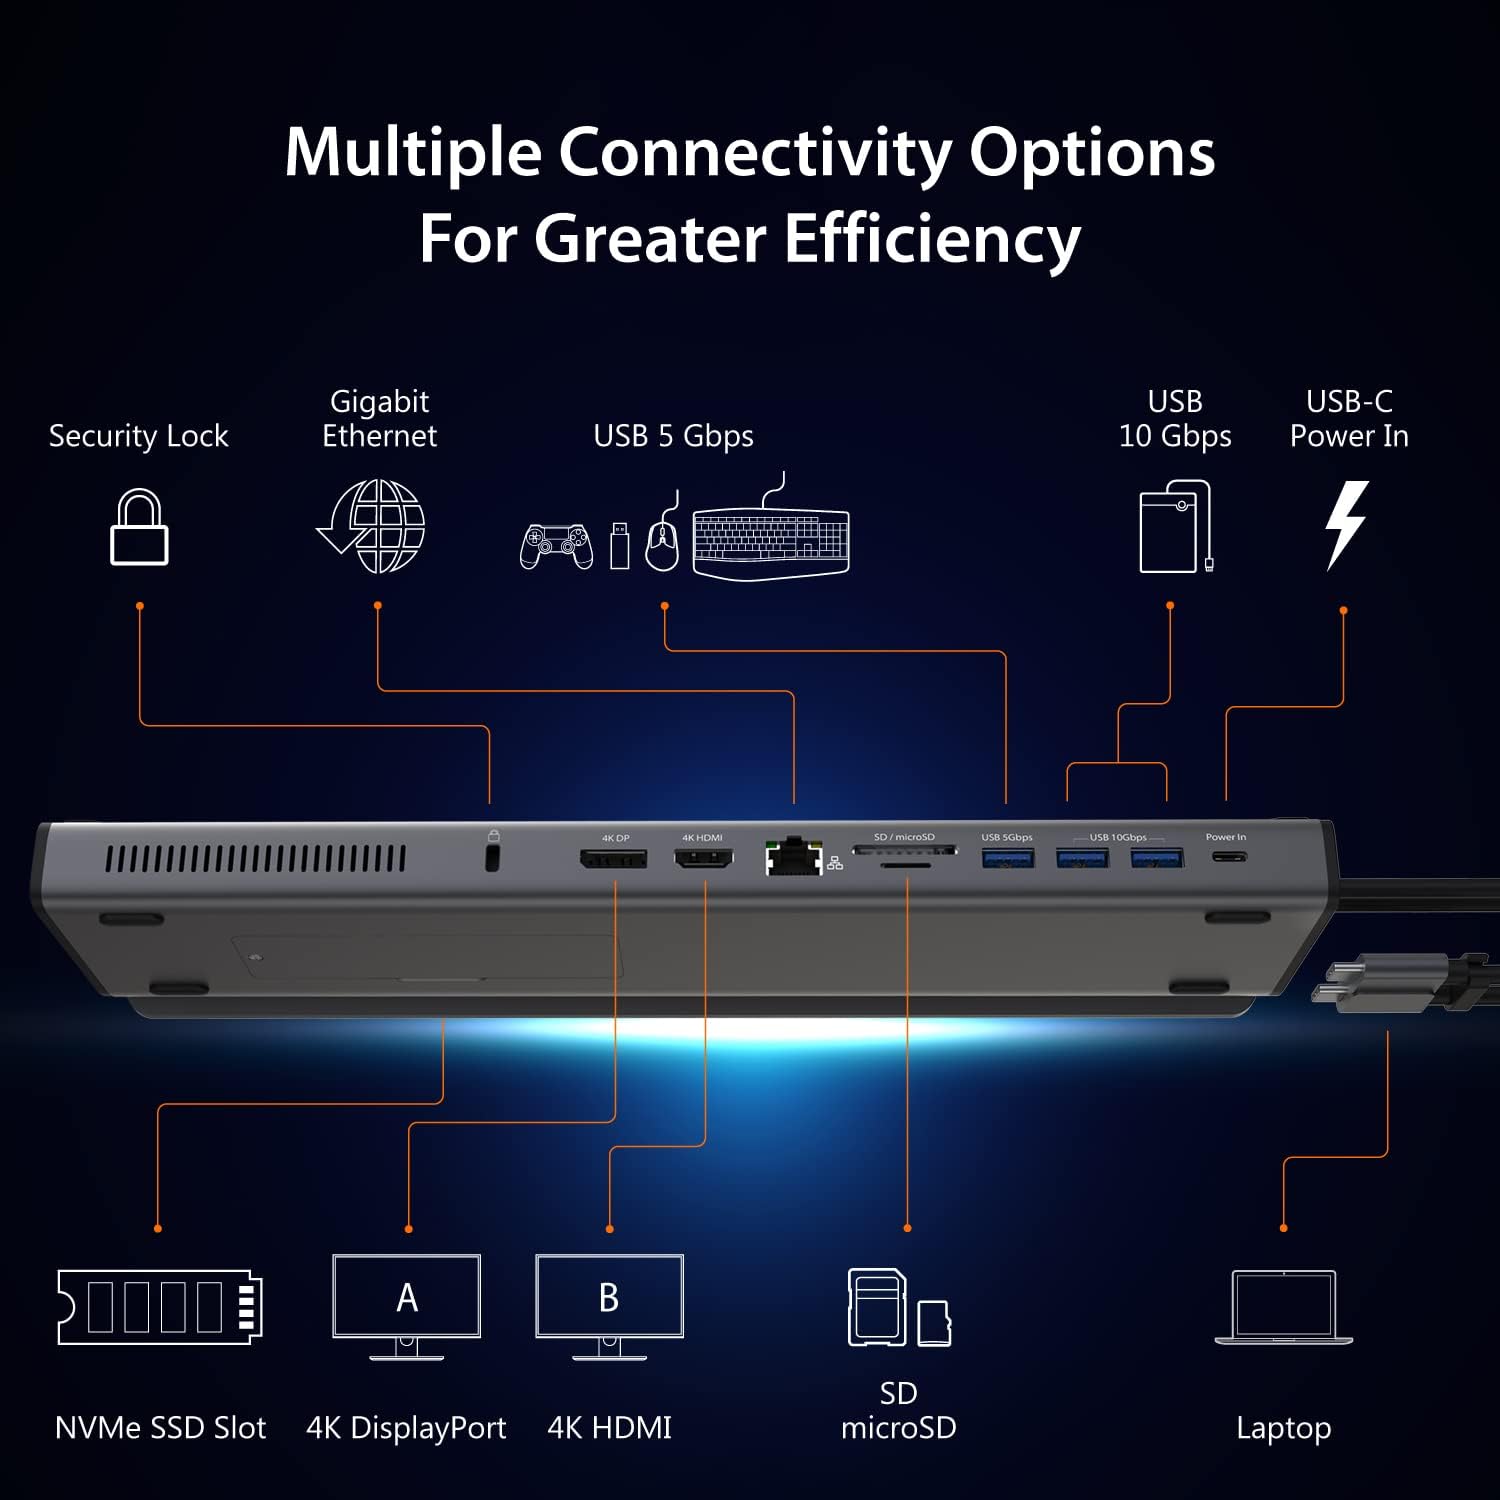 This photo shows a laptop docking station with multiple connectivity options for greater efficiency.